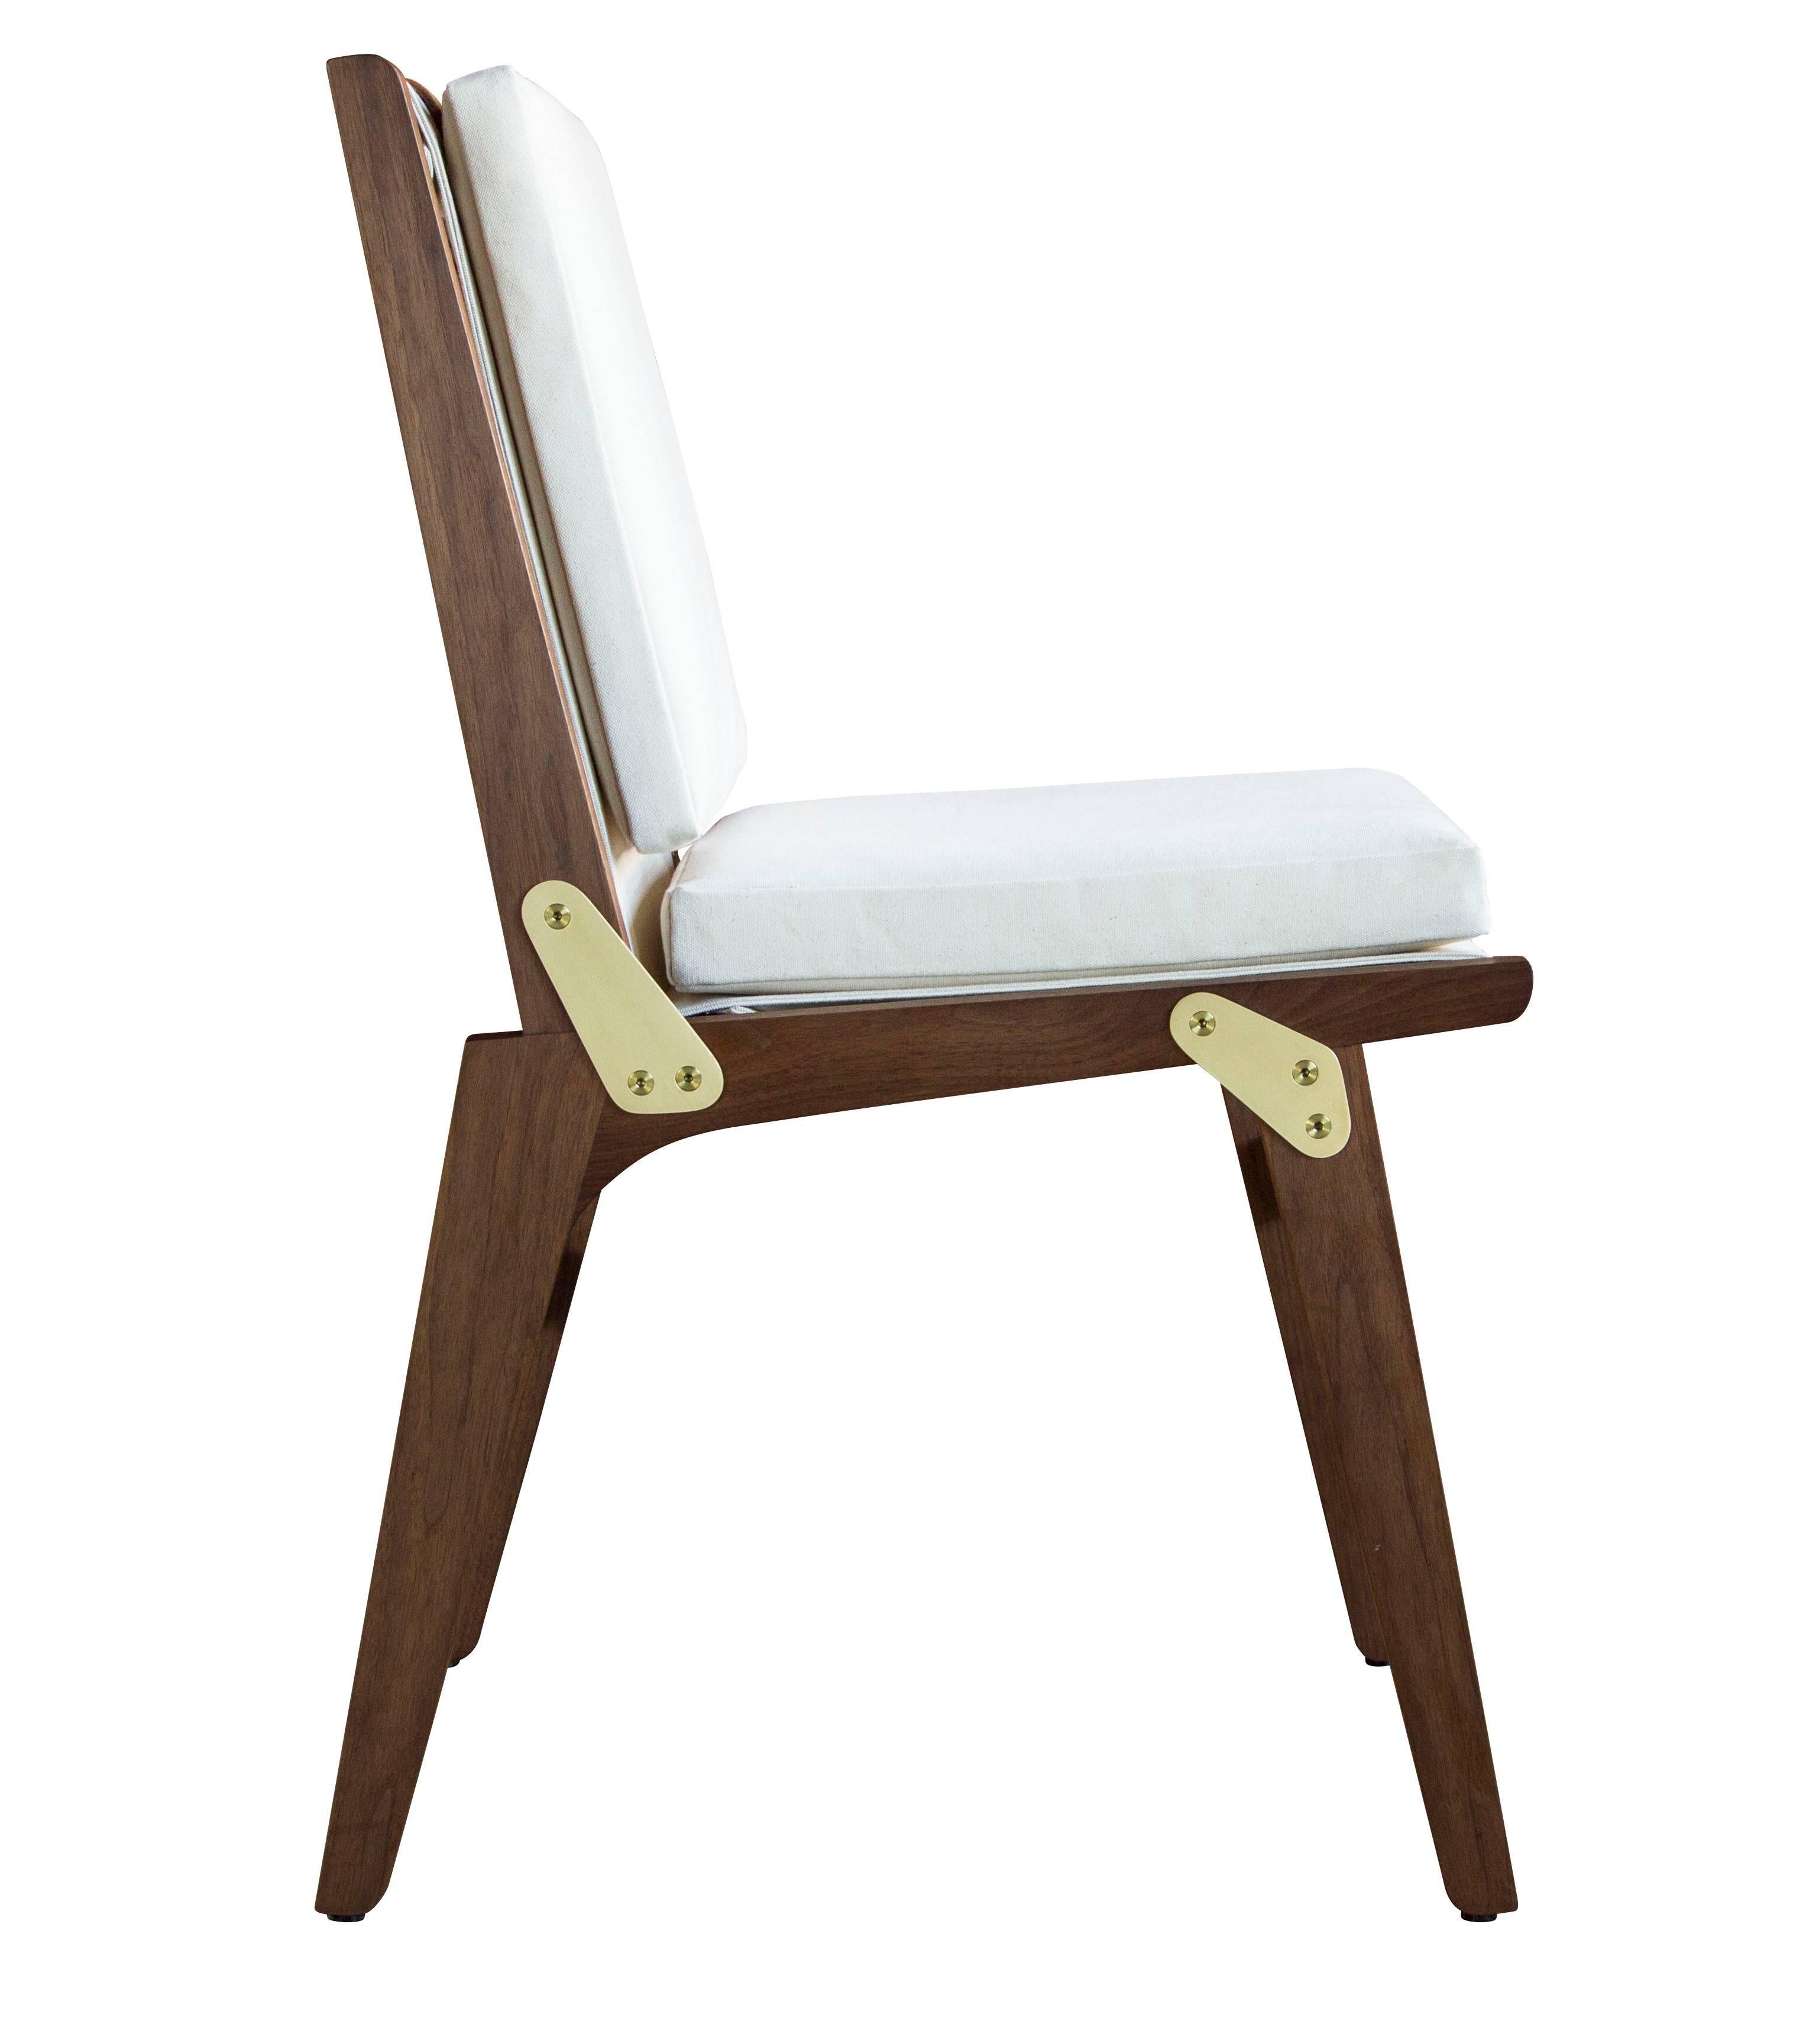 The Officer's Field Set dining chair (non-folding version) in oiled walnut with white canvas upholstery and coach English bridle leather strapping.

The modern campaign collection by Richard Wrightman combines the vernacular of traditional form with